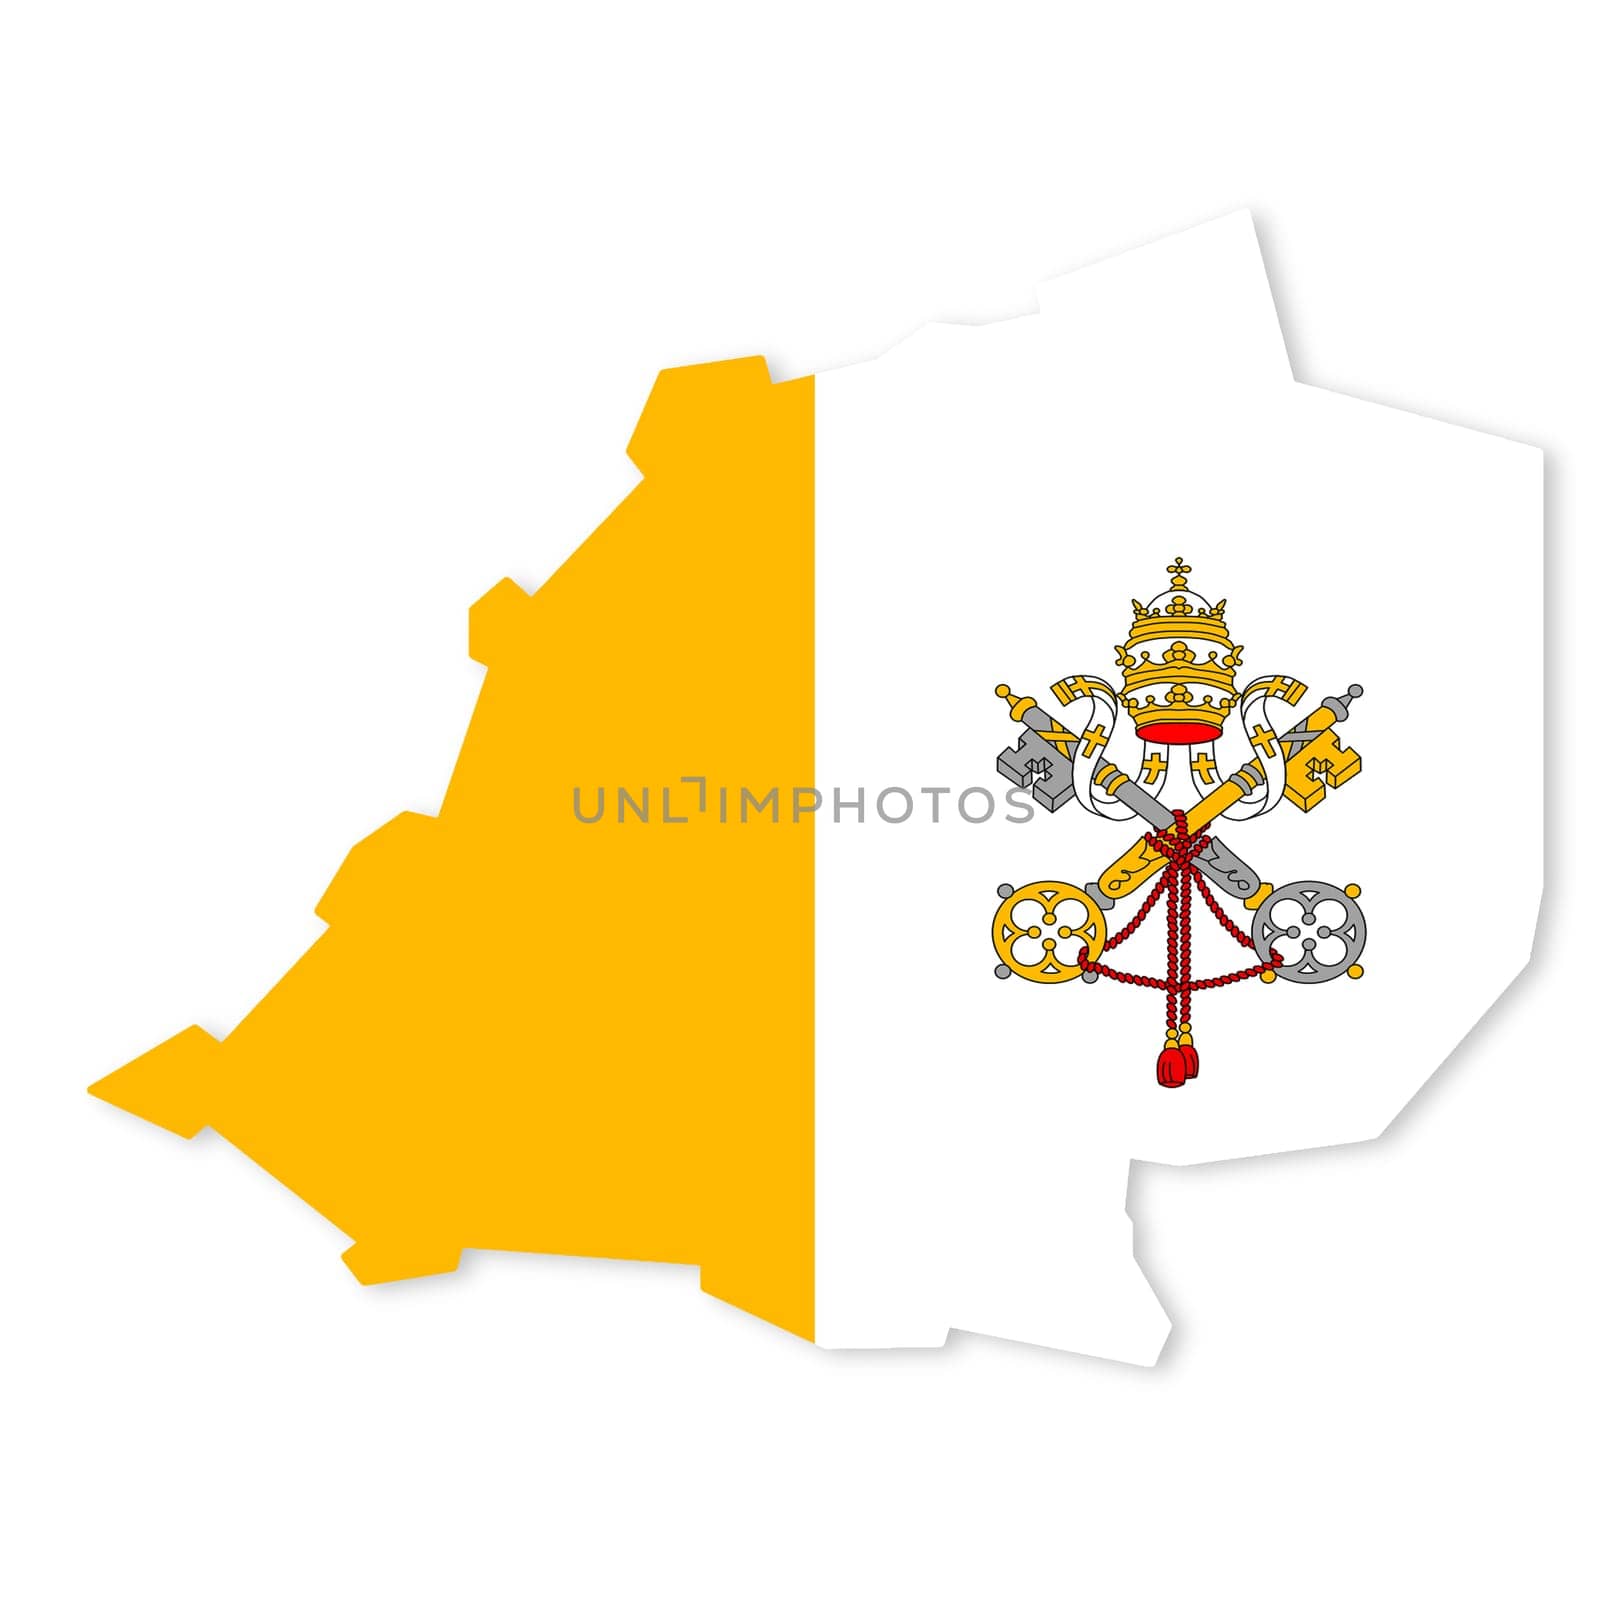 A Vatican City flag map on white background with clipping path 3d illustration